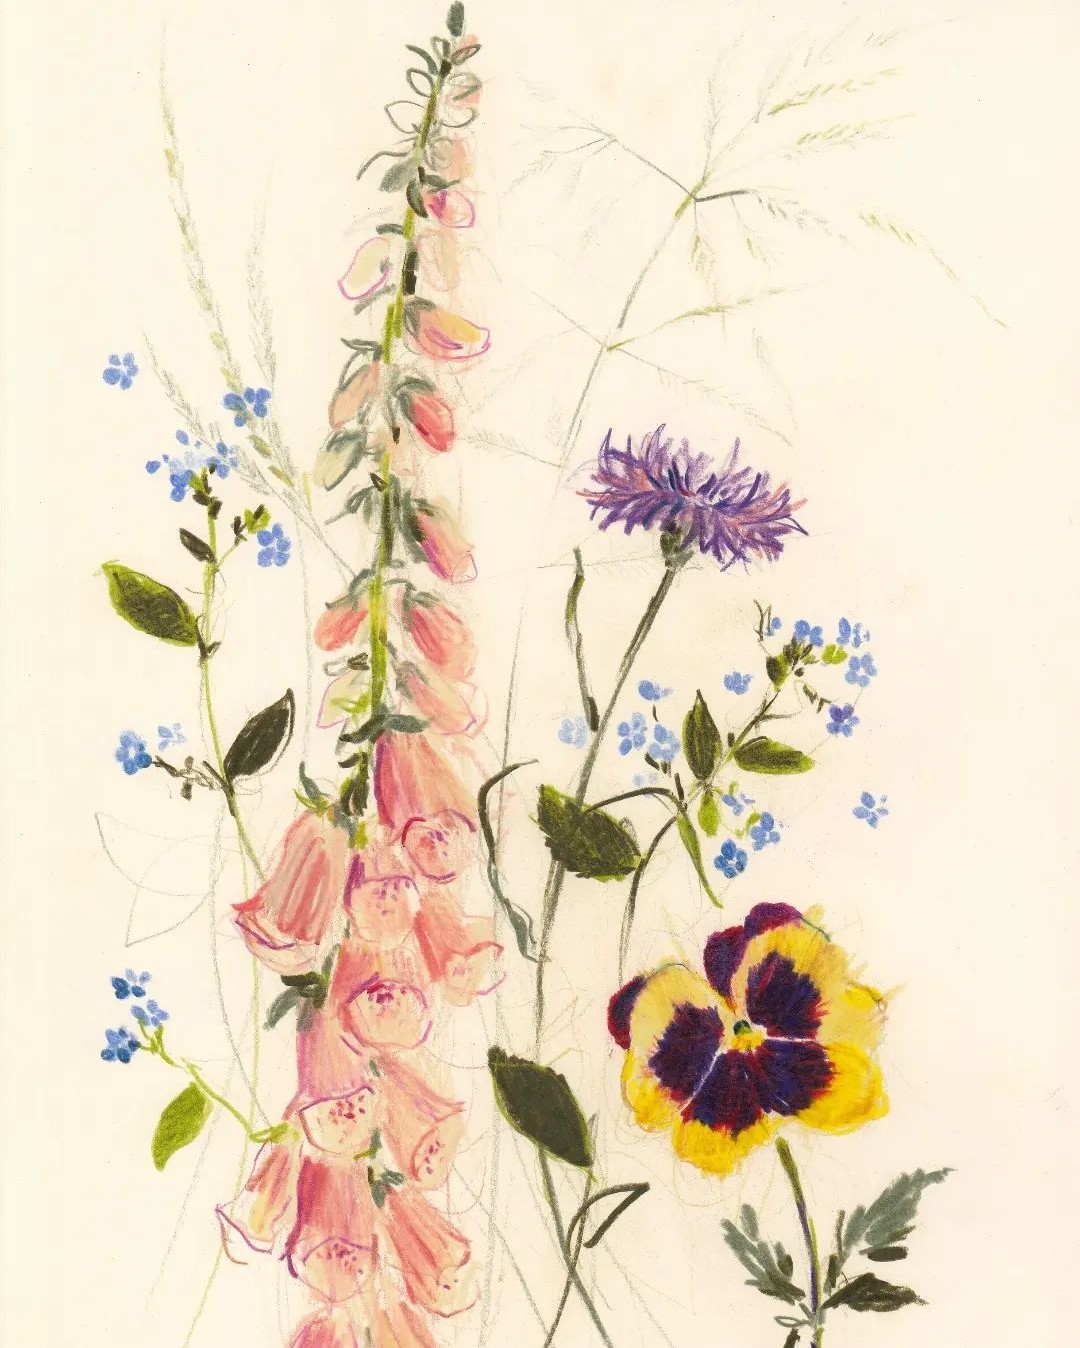 Foxgloves and pansies illustrations by Claudia Lowry